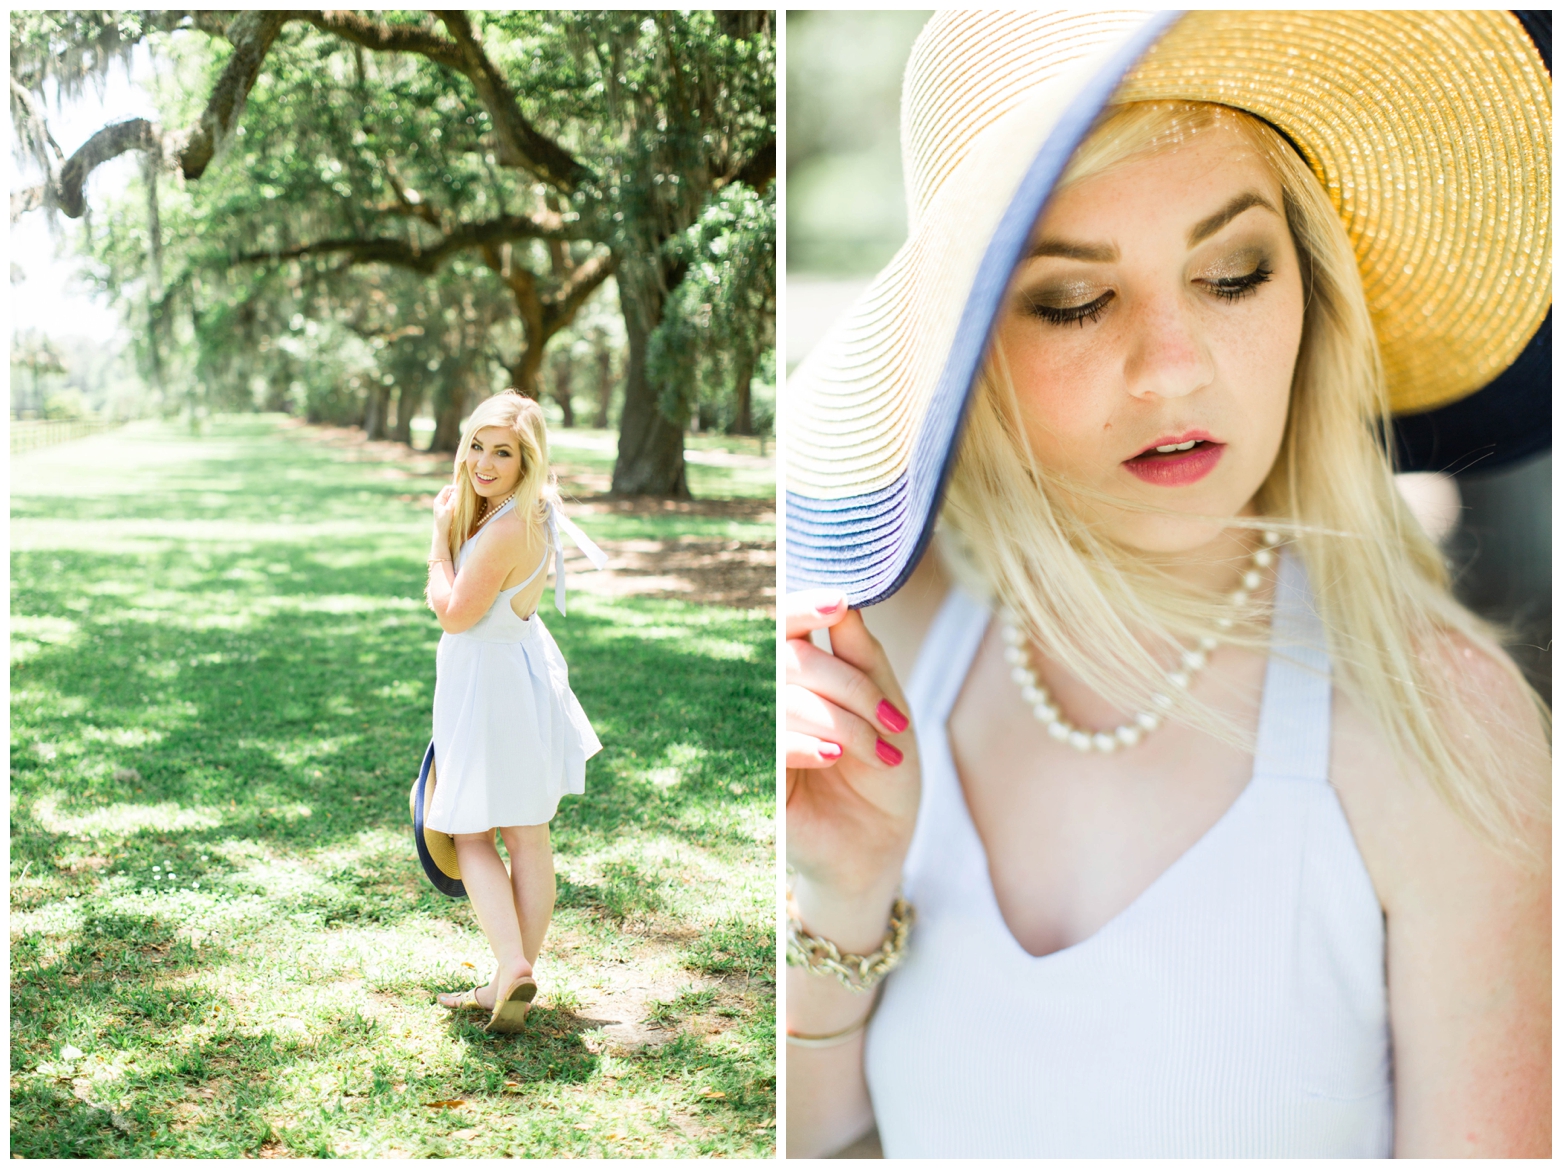 View More: http://nataliejaynephotography.pass.us/charlestonsc-hope